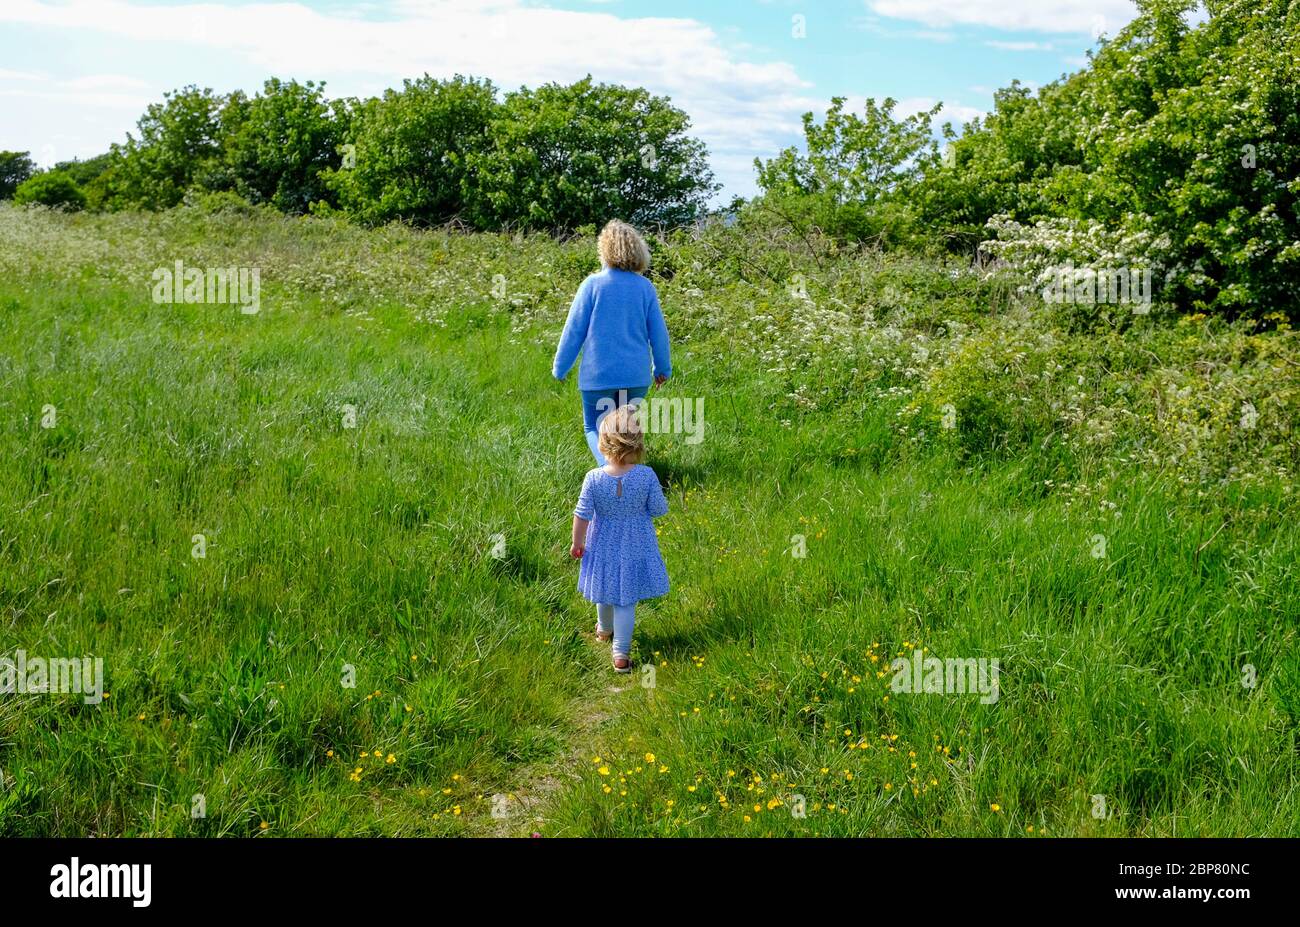 Woodingdean Brighton UK - Young 3 year old girl walking in a meadow with grandmother Stock Photo